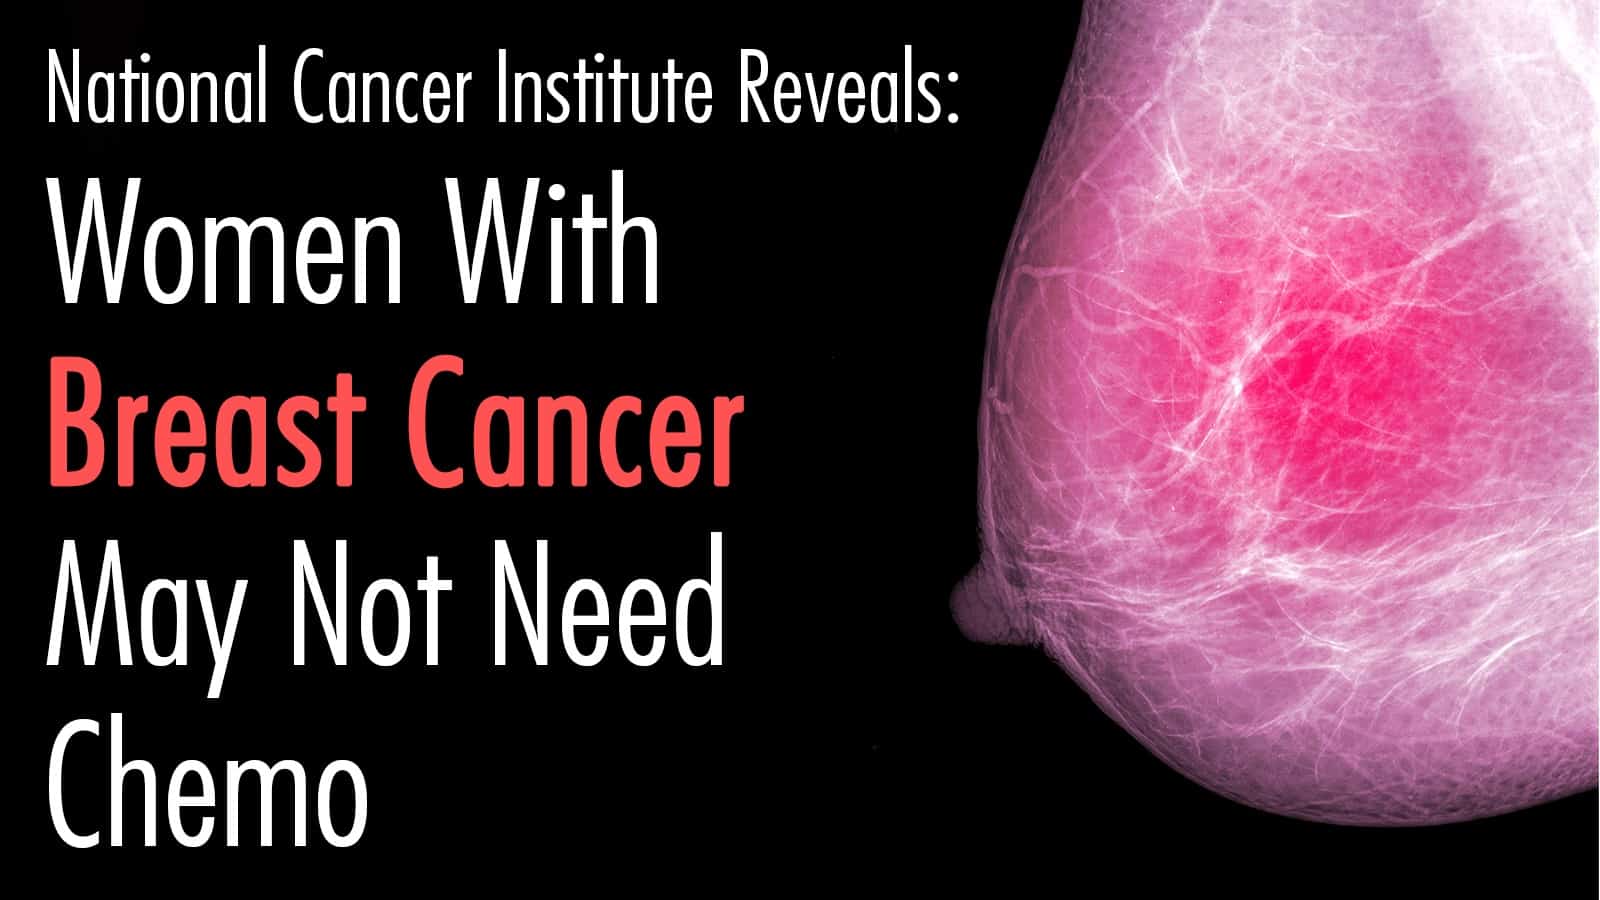 National Cancer Institute Reveals Why Women With Breast Cancer May Not Need Chemotherapy